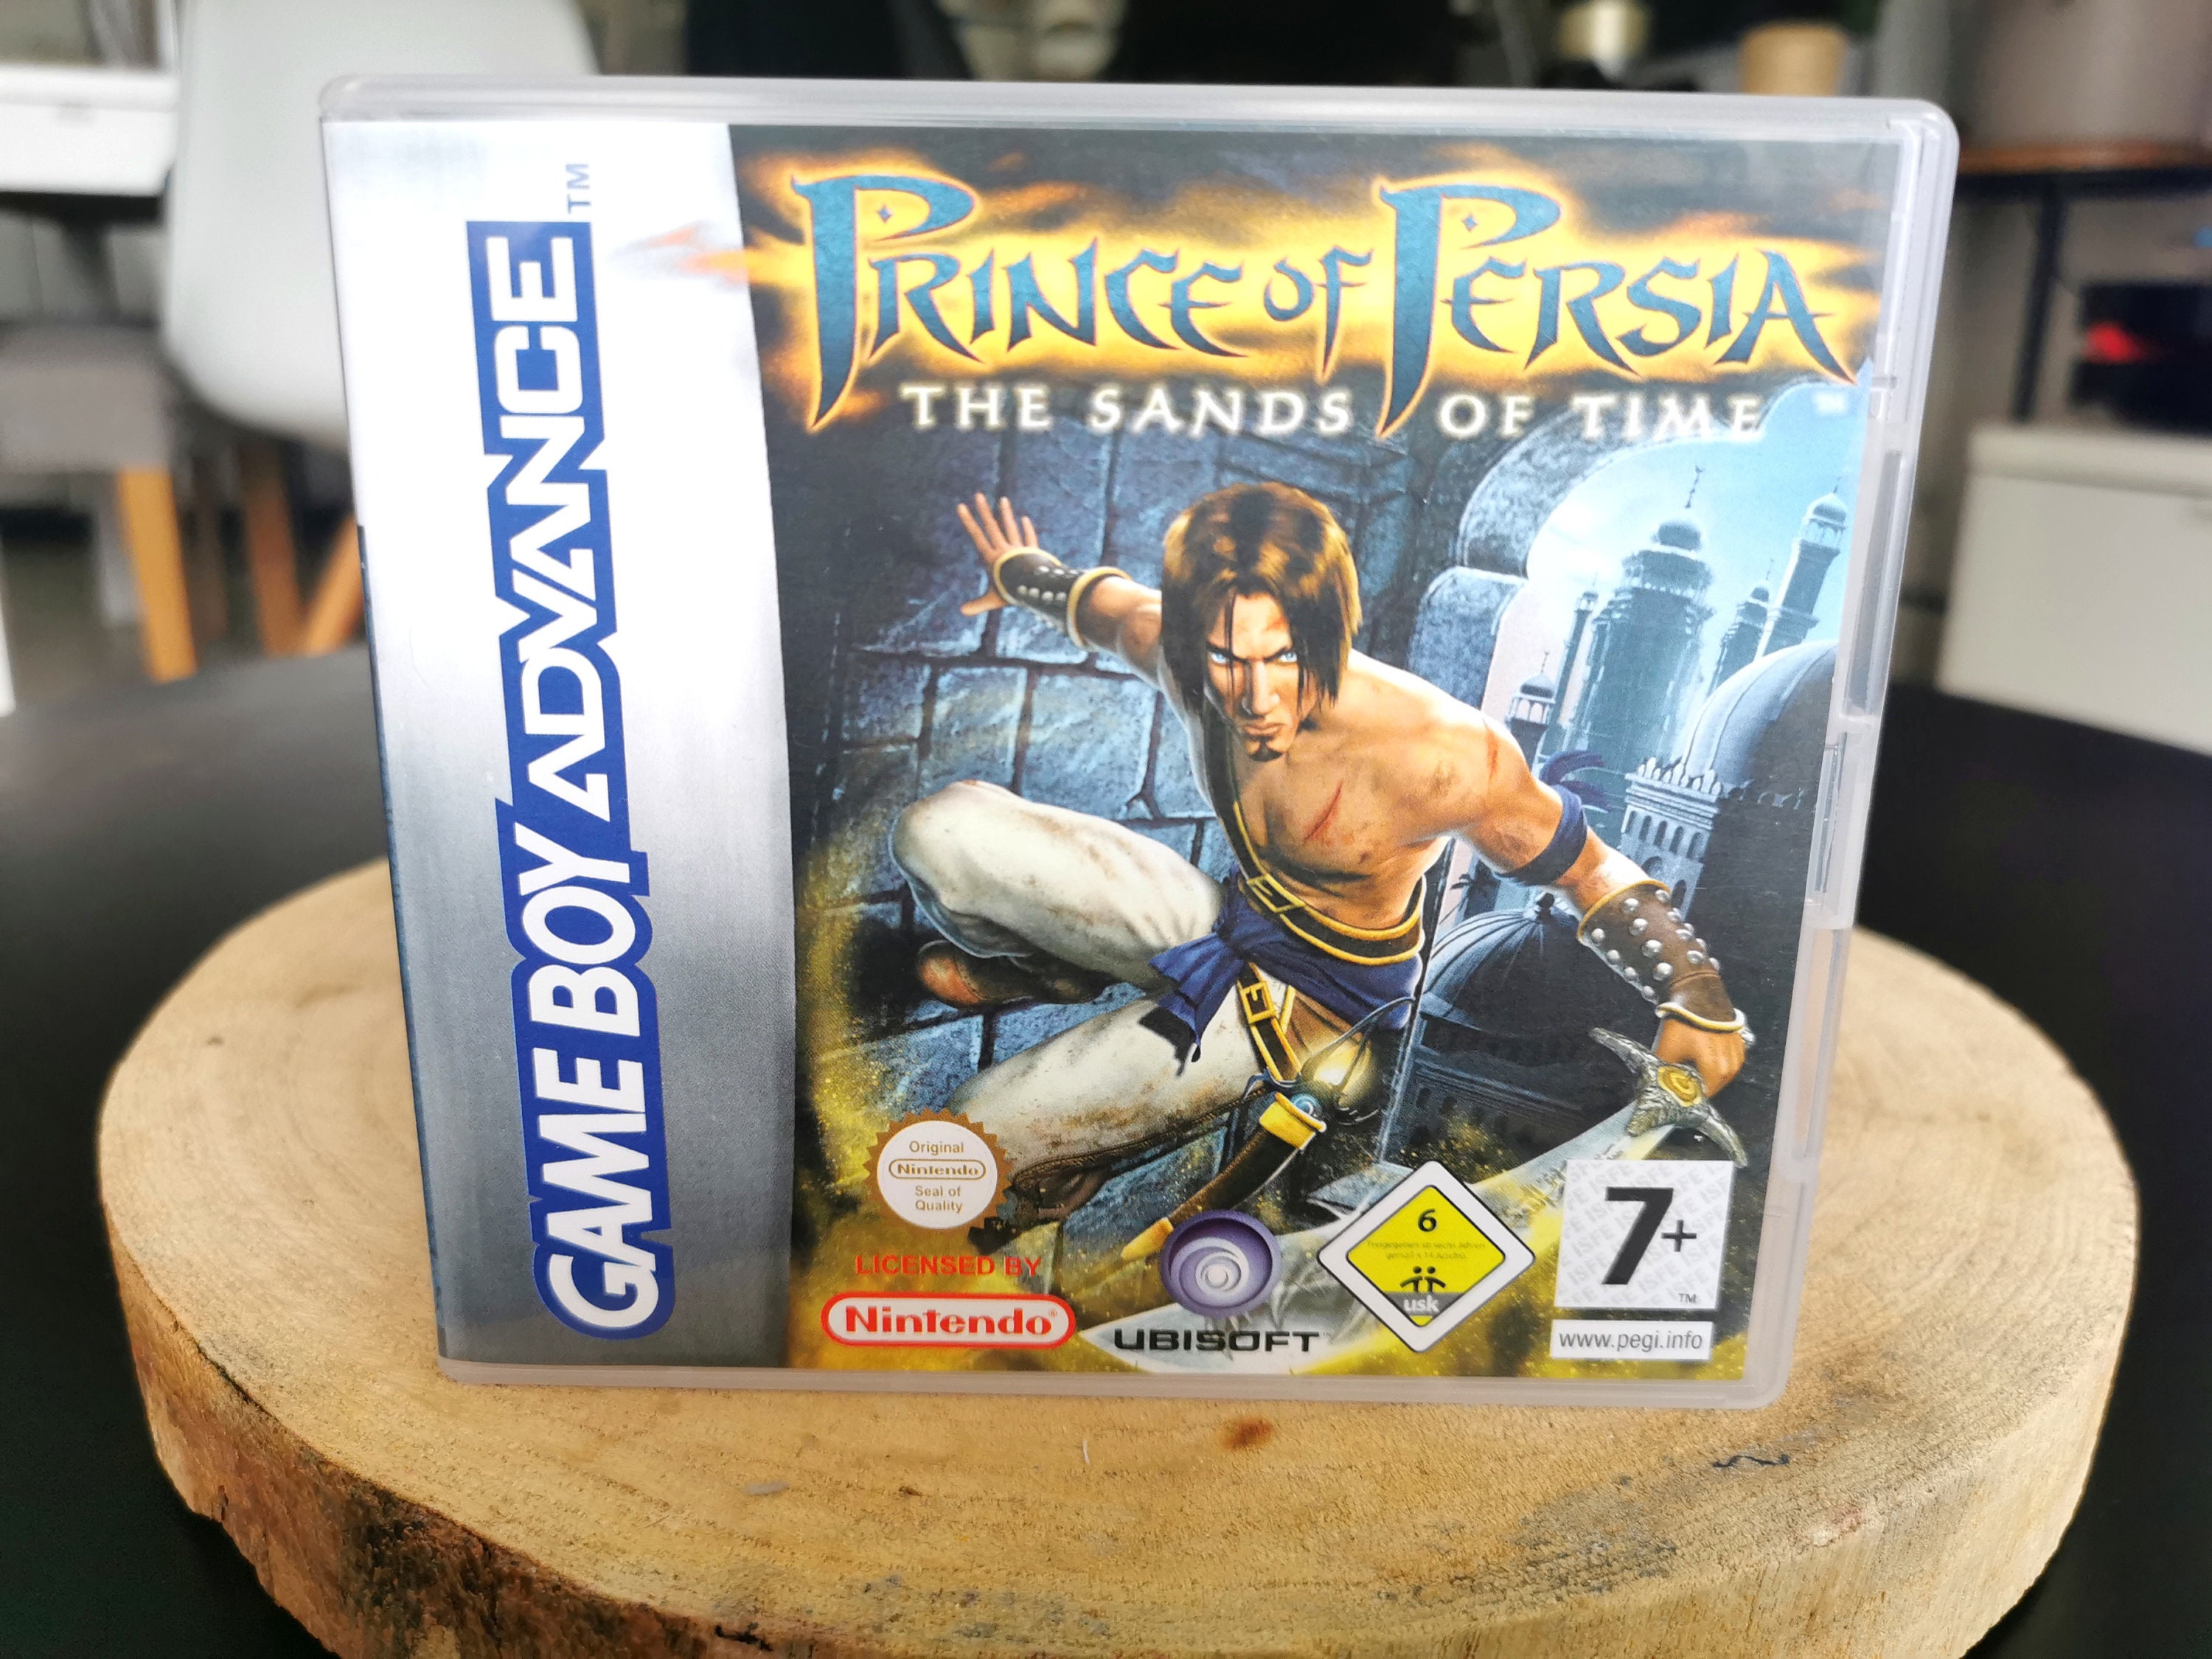 Prince of Persia: The Sands of Time - Plugged In